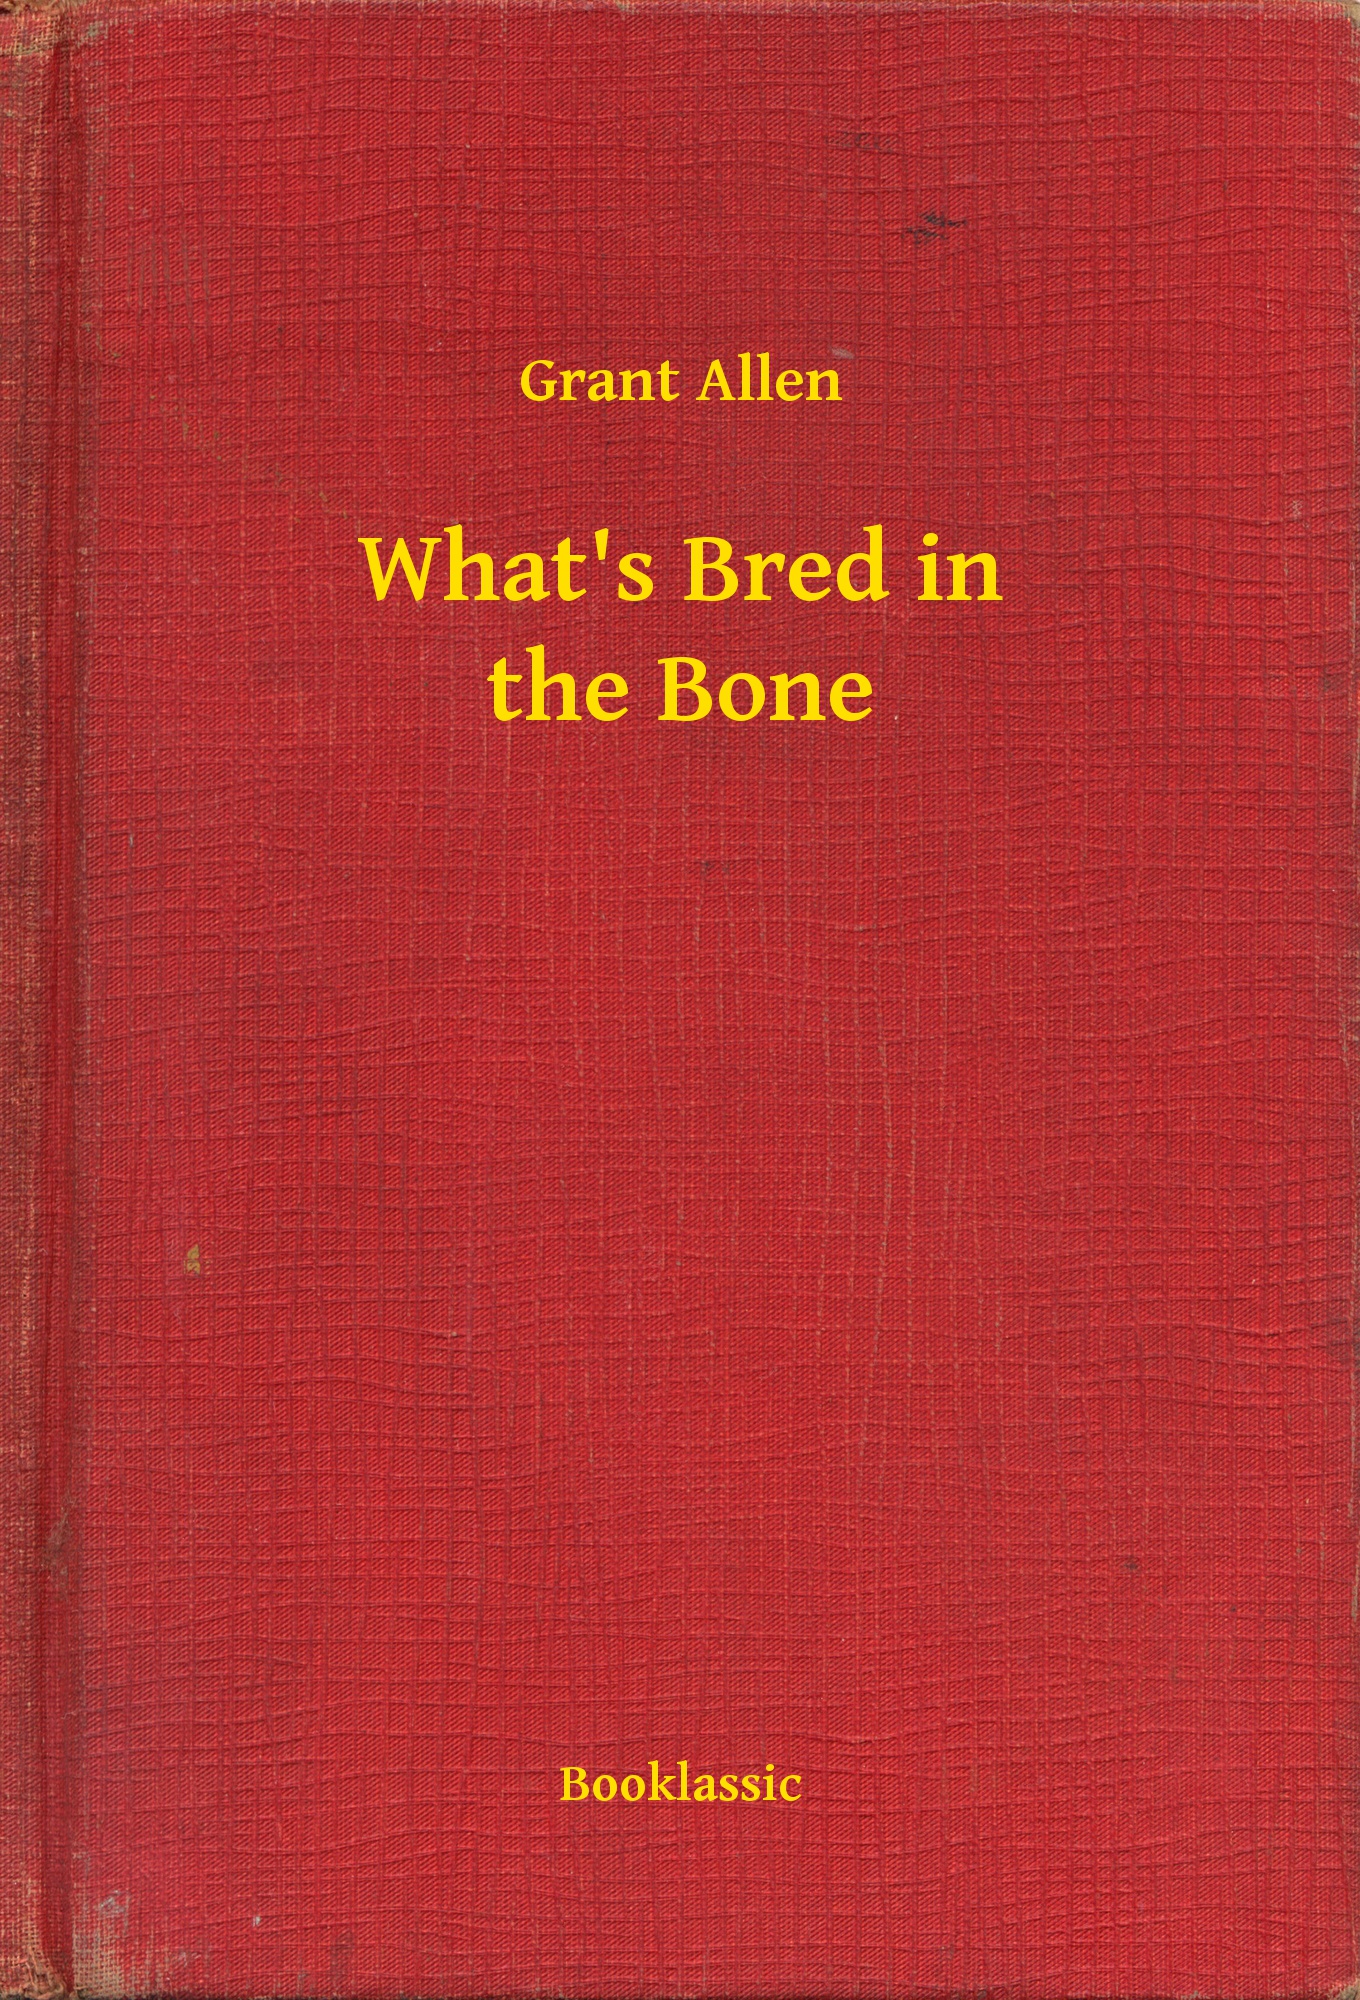 What"s Bred in the Bone